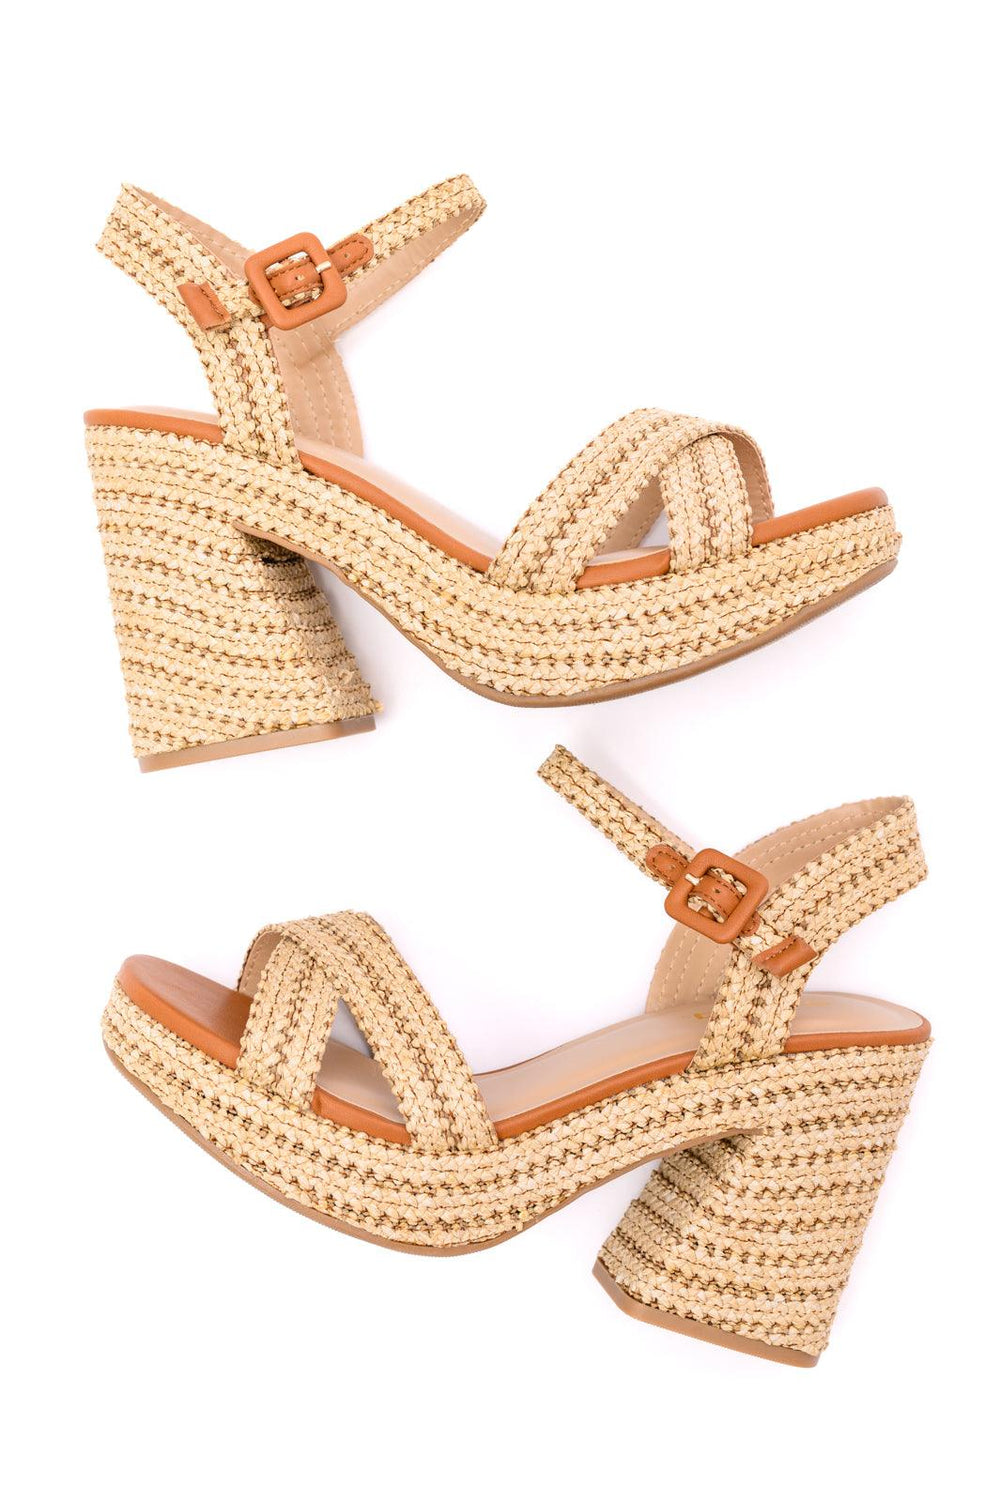 Bon Voyage Rope Woven Heel Shoes Shoes